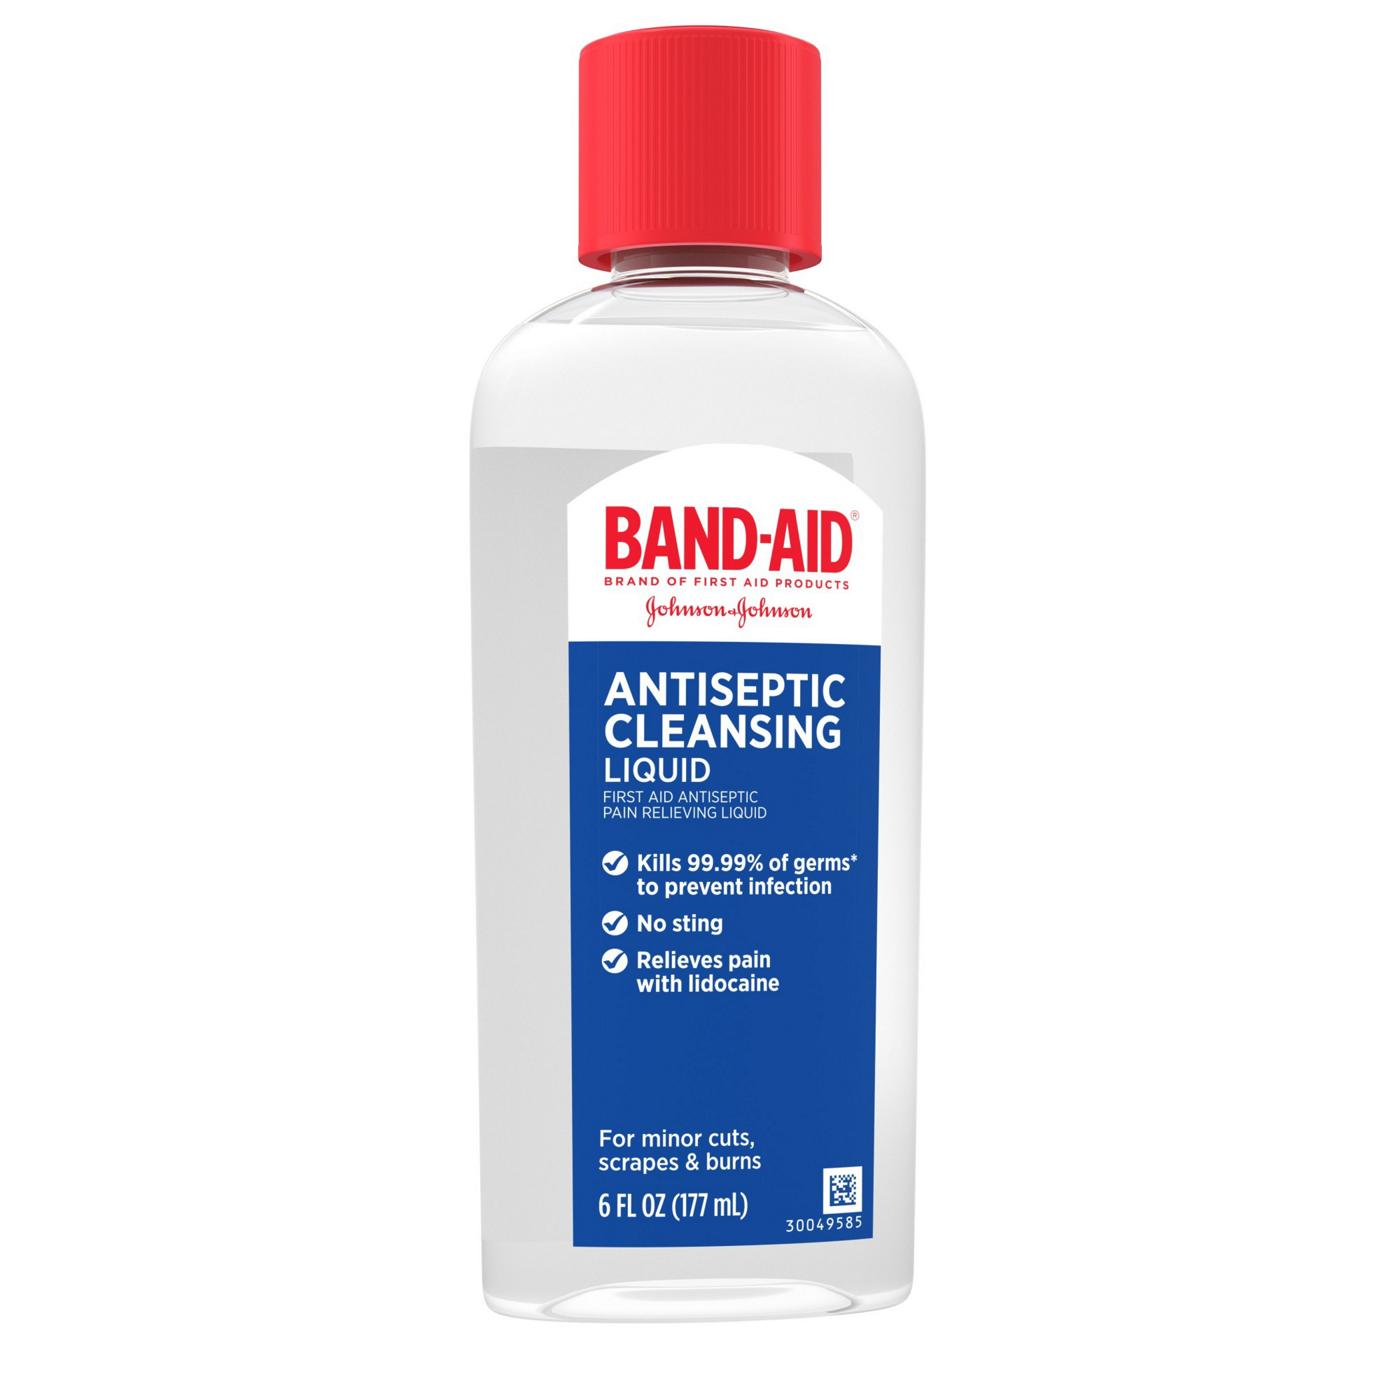 Band-Aid Antiseptic Cleaning Liquid; image 1 of 2